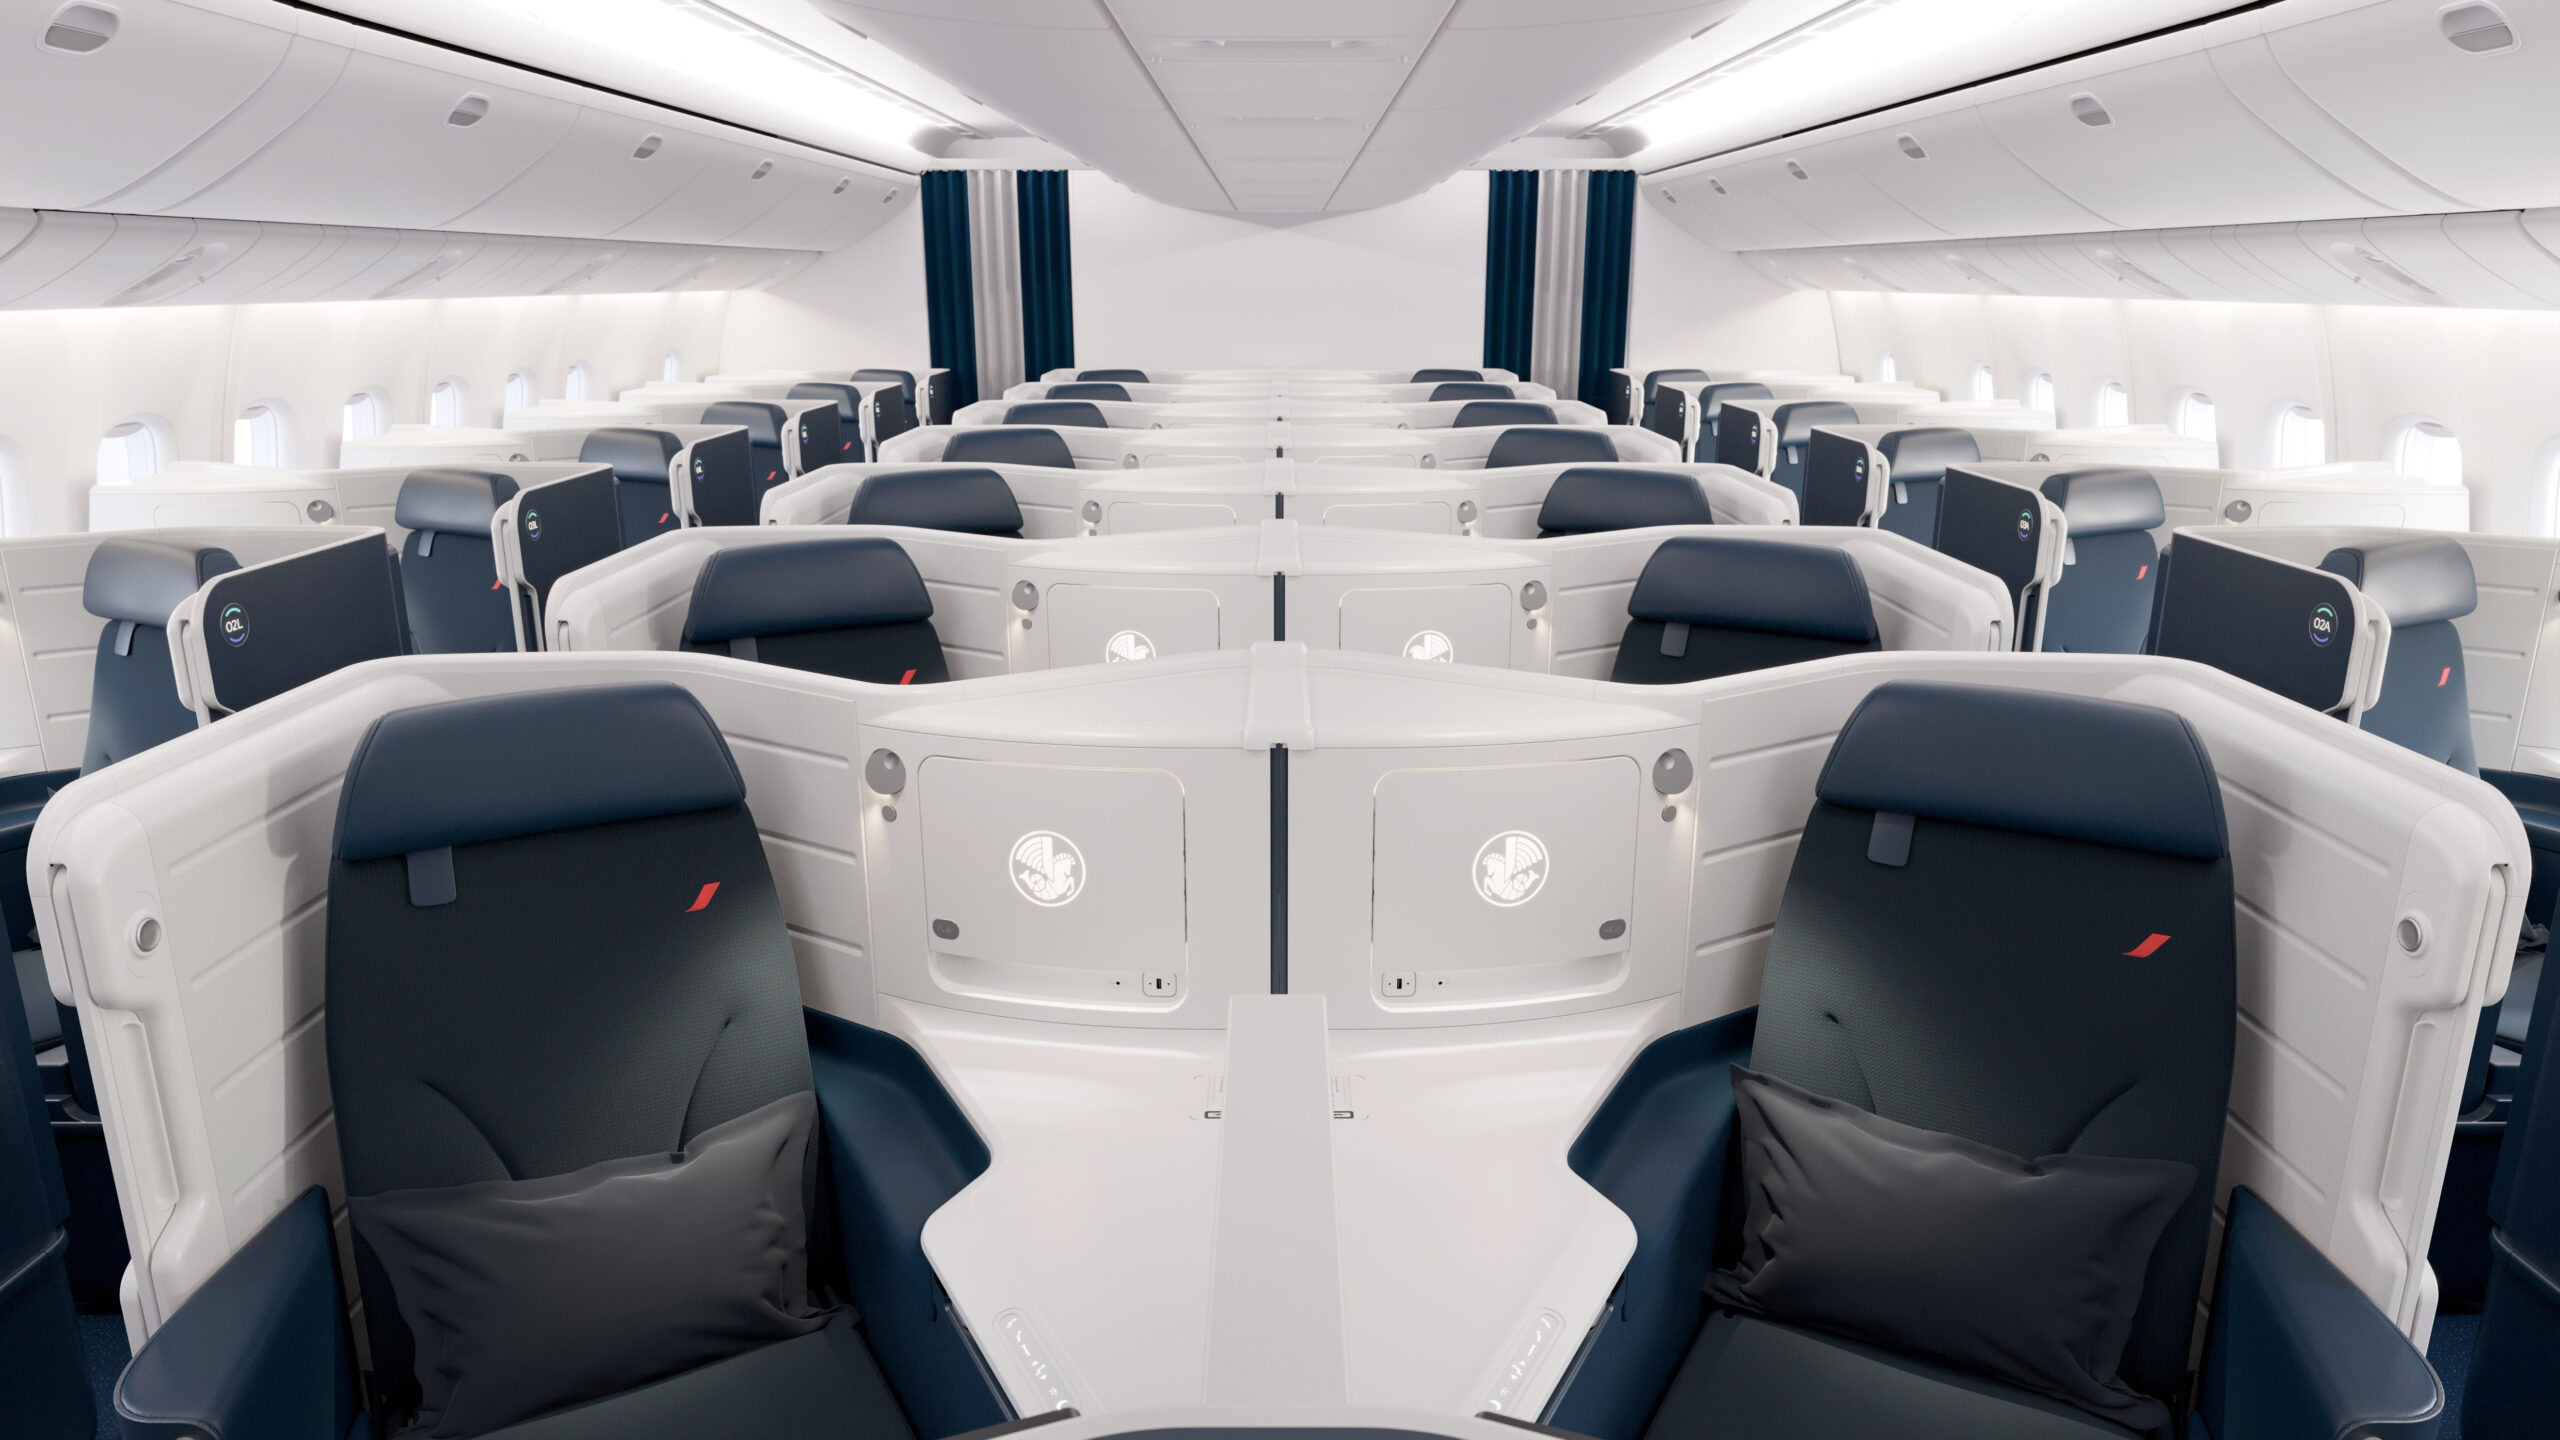 Air France Unveiled New Business Class Seat With a Door